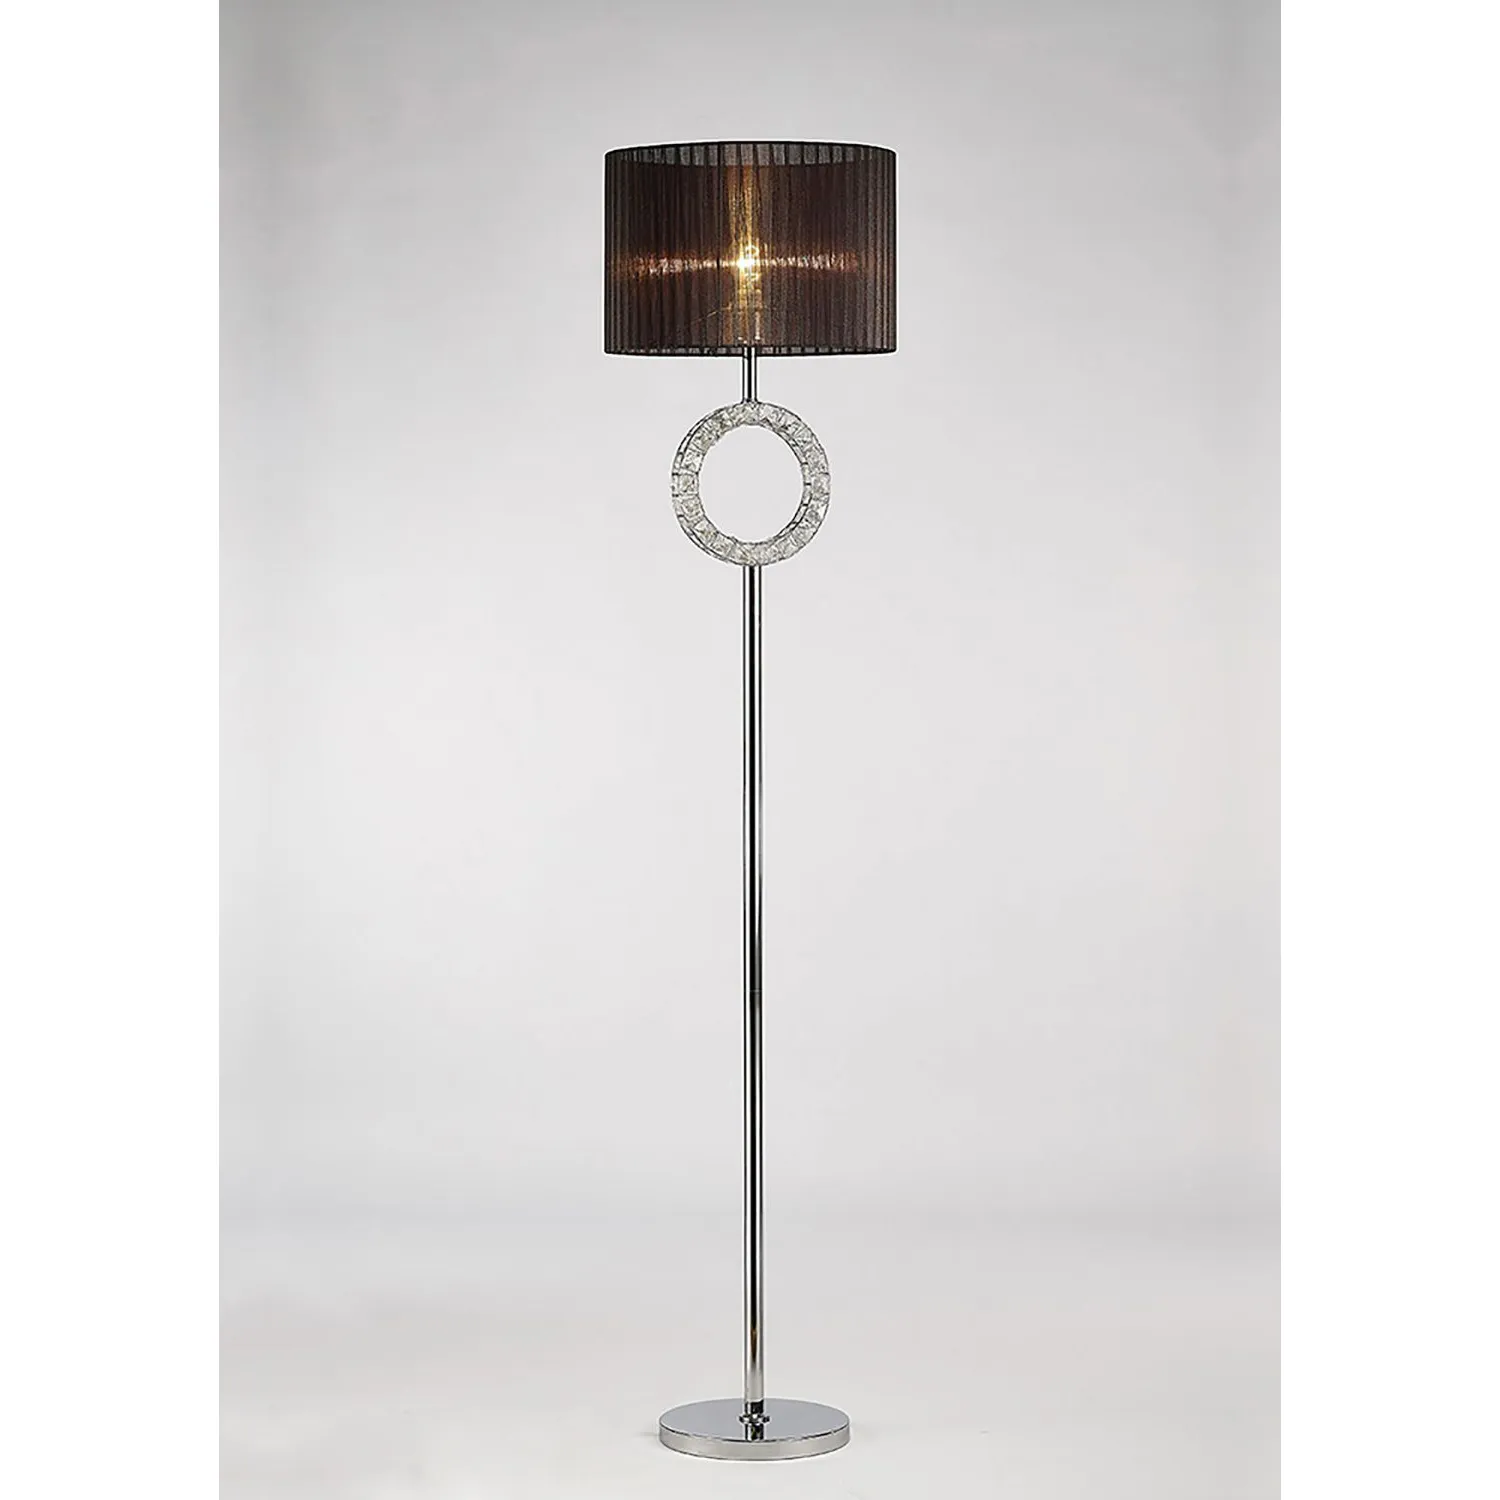 Florence Round Floor Lamp With Black Shade 1 Light E27 Polished Chrome Crystal Item Weight: 19.07kg